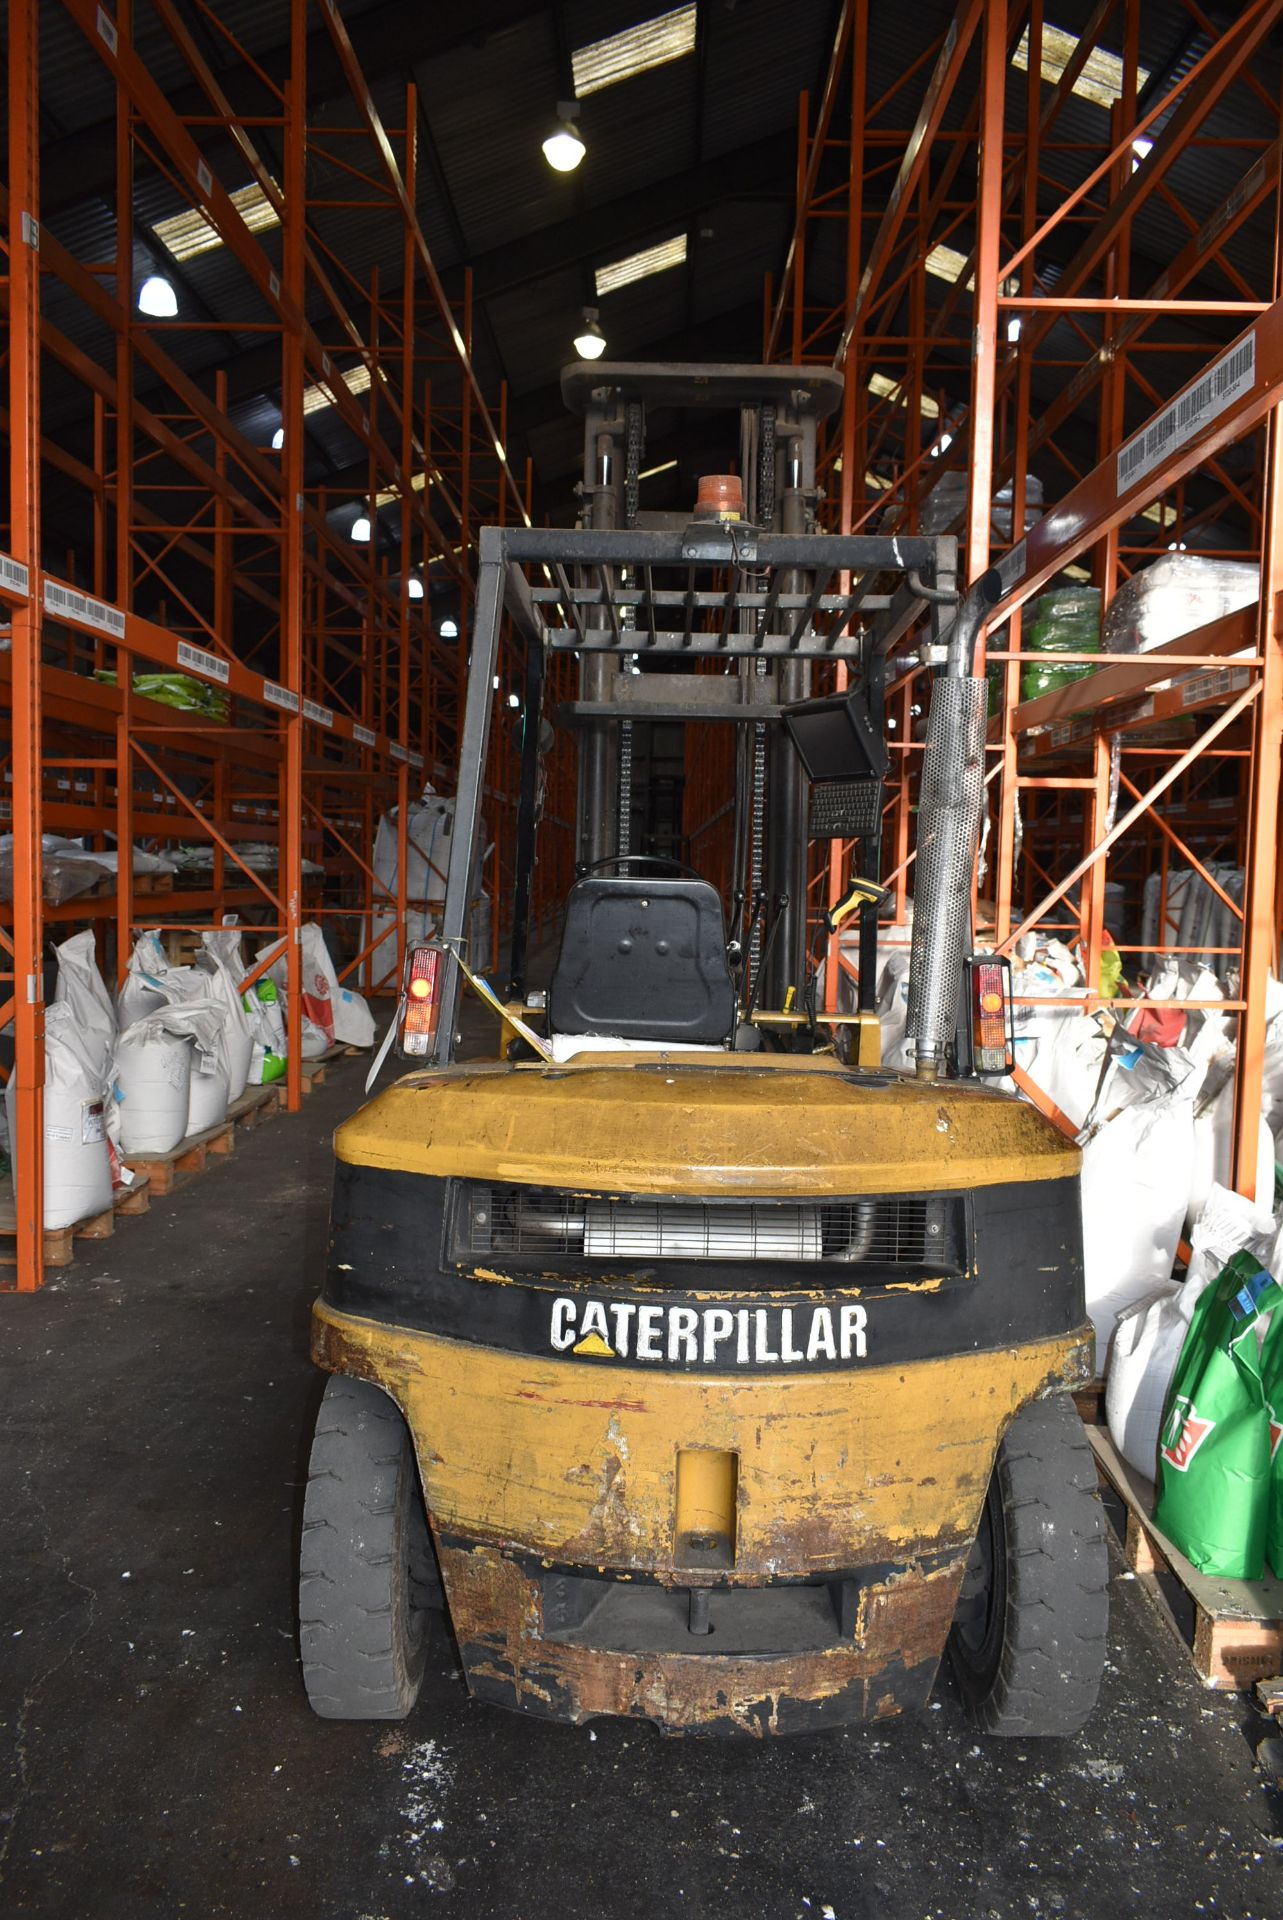 Caterpillar DP40 DIESEL ENGINE FORK LIFT TRUCK, serial no. 3CN00723, year of manufacture 1996, - Image 4 of 9